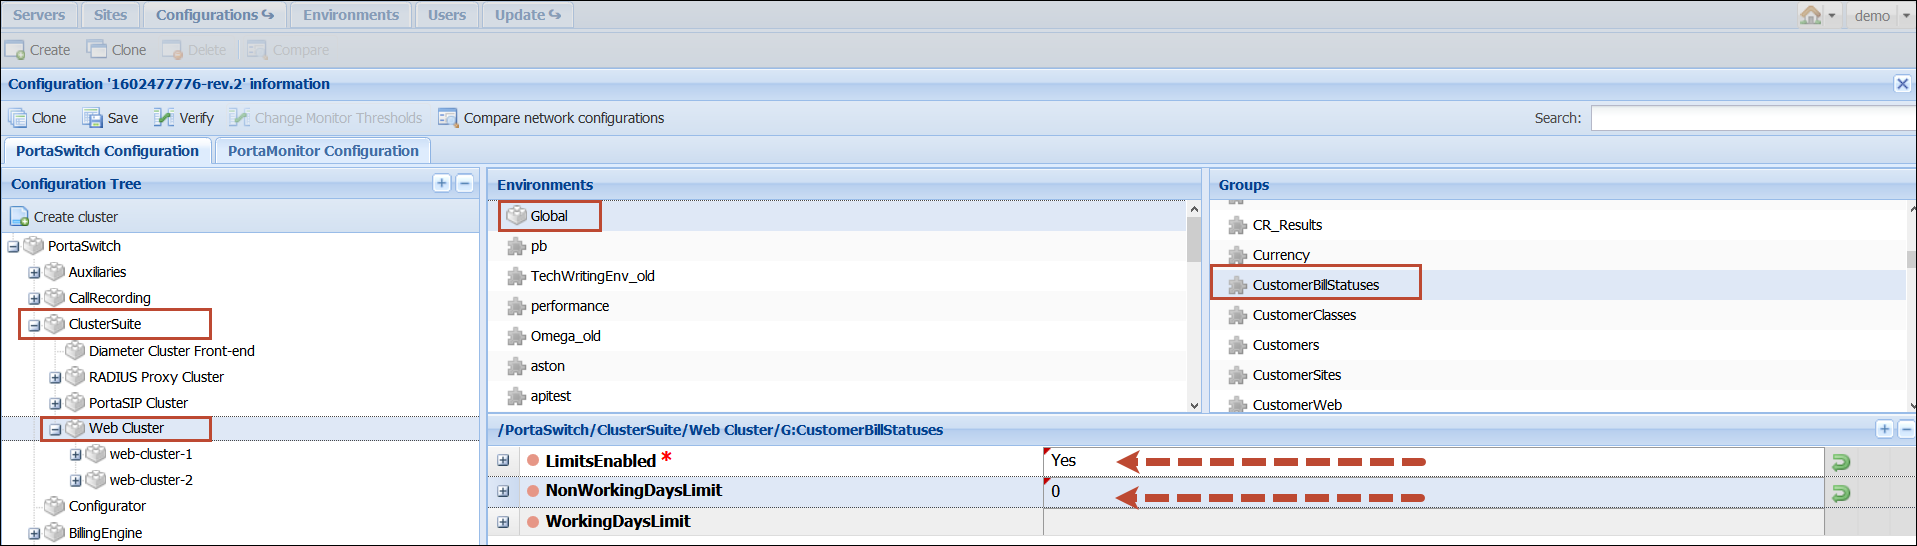 Configure an automatic shift in the service limitation/suspension date